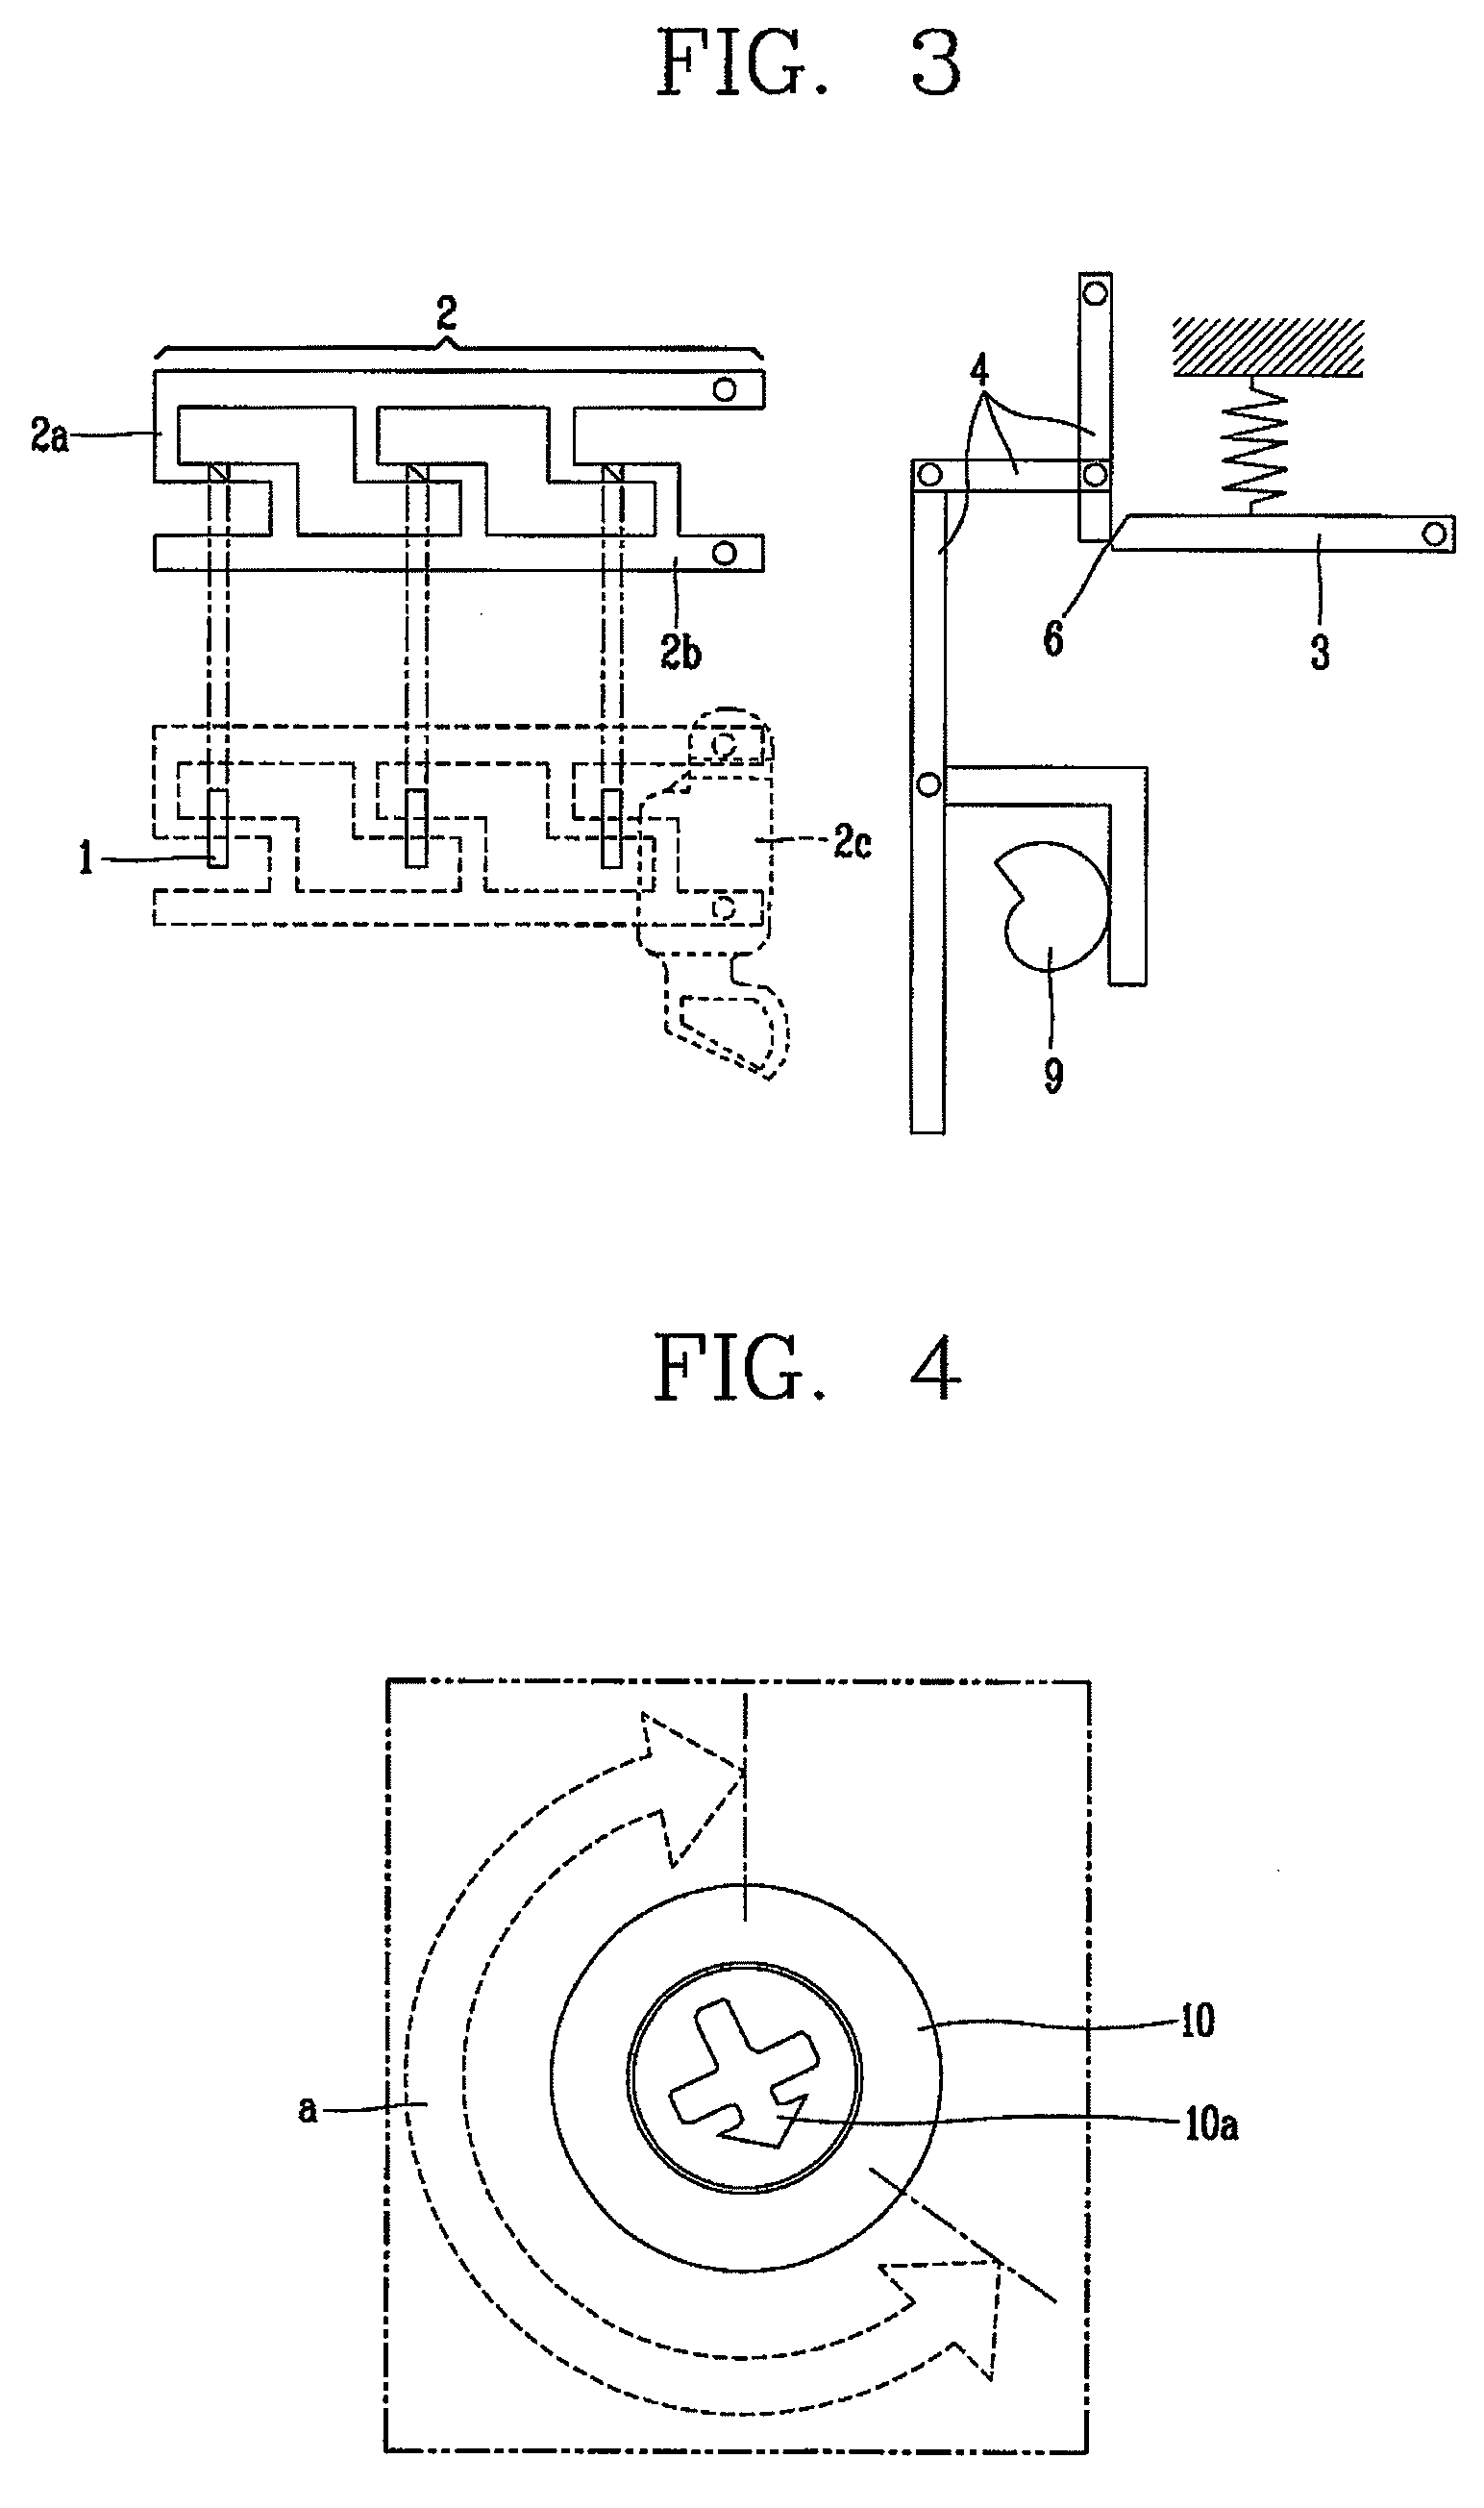 Method for adjusting trip sensitivity of thermal overload protection apparatus